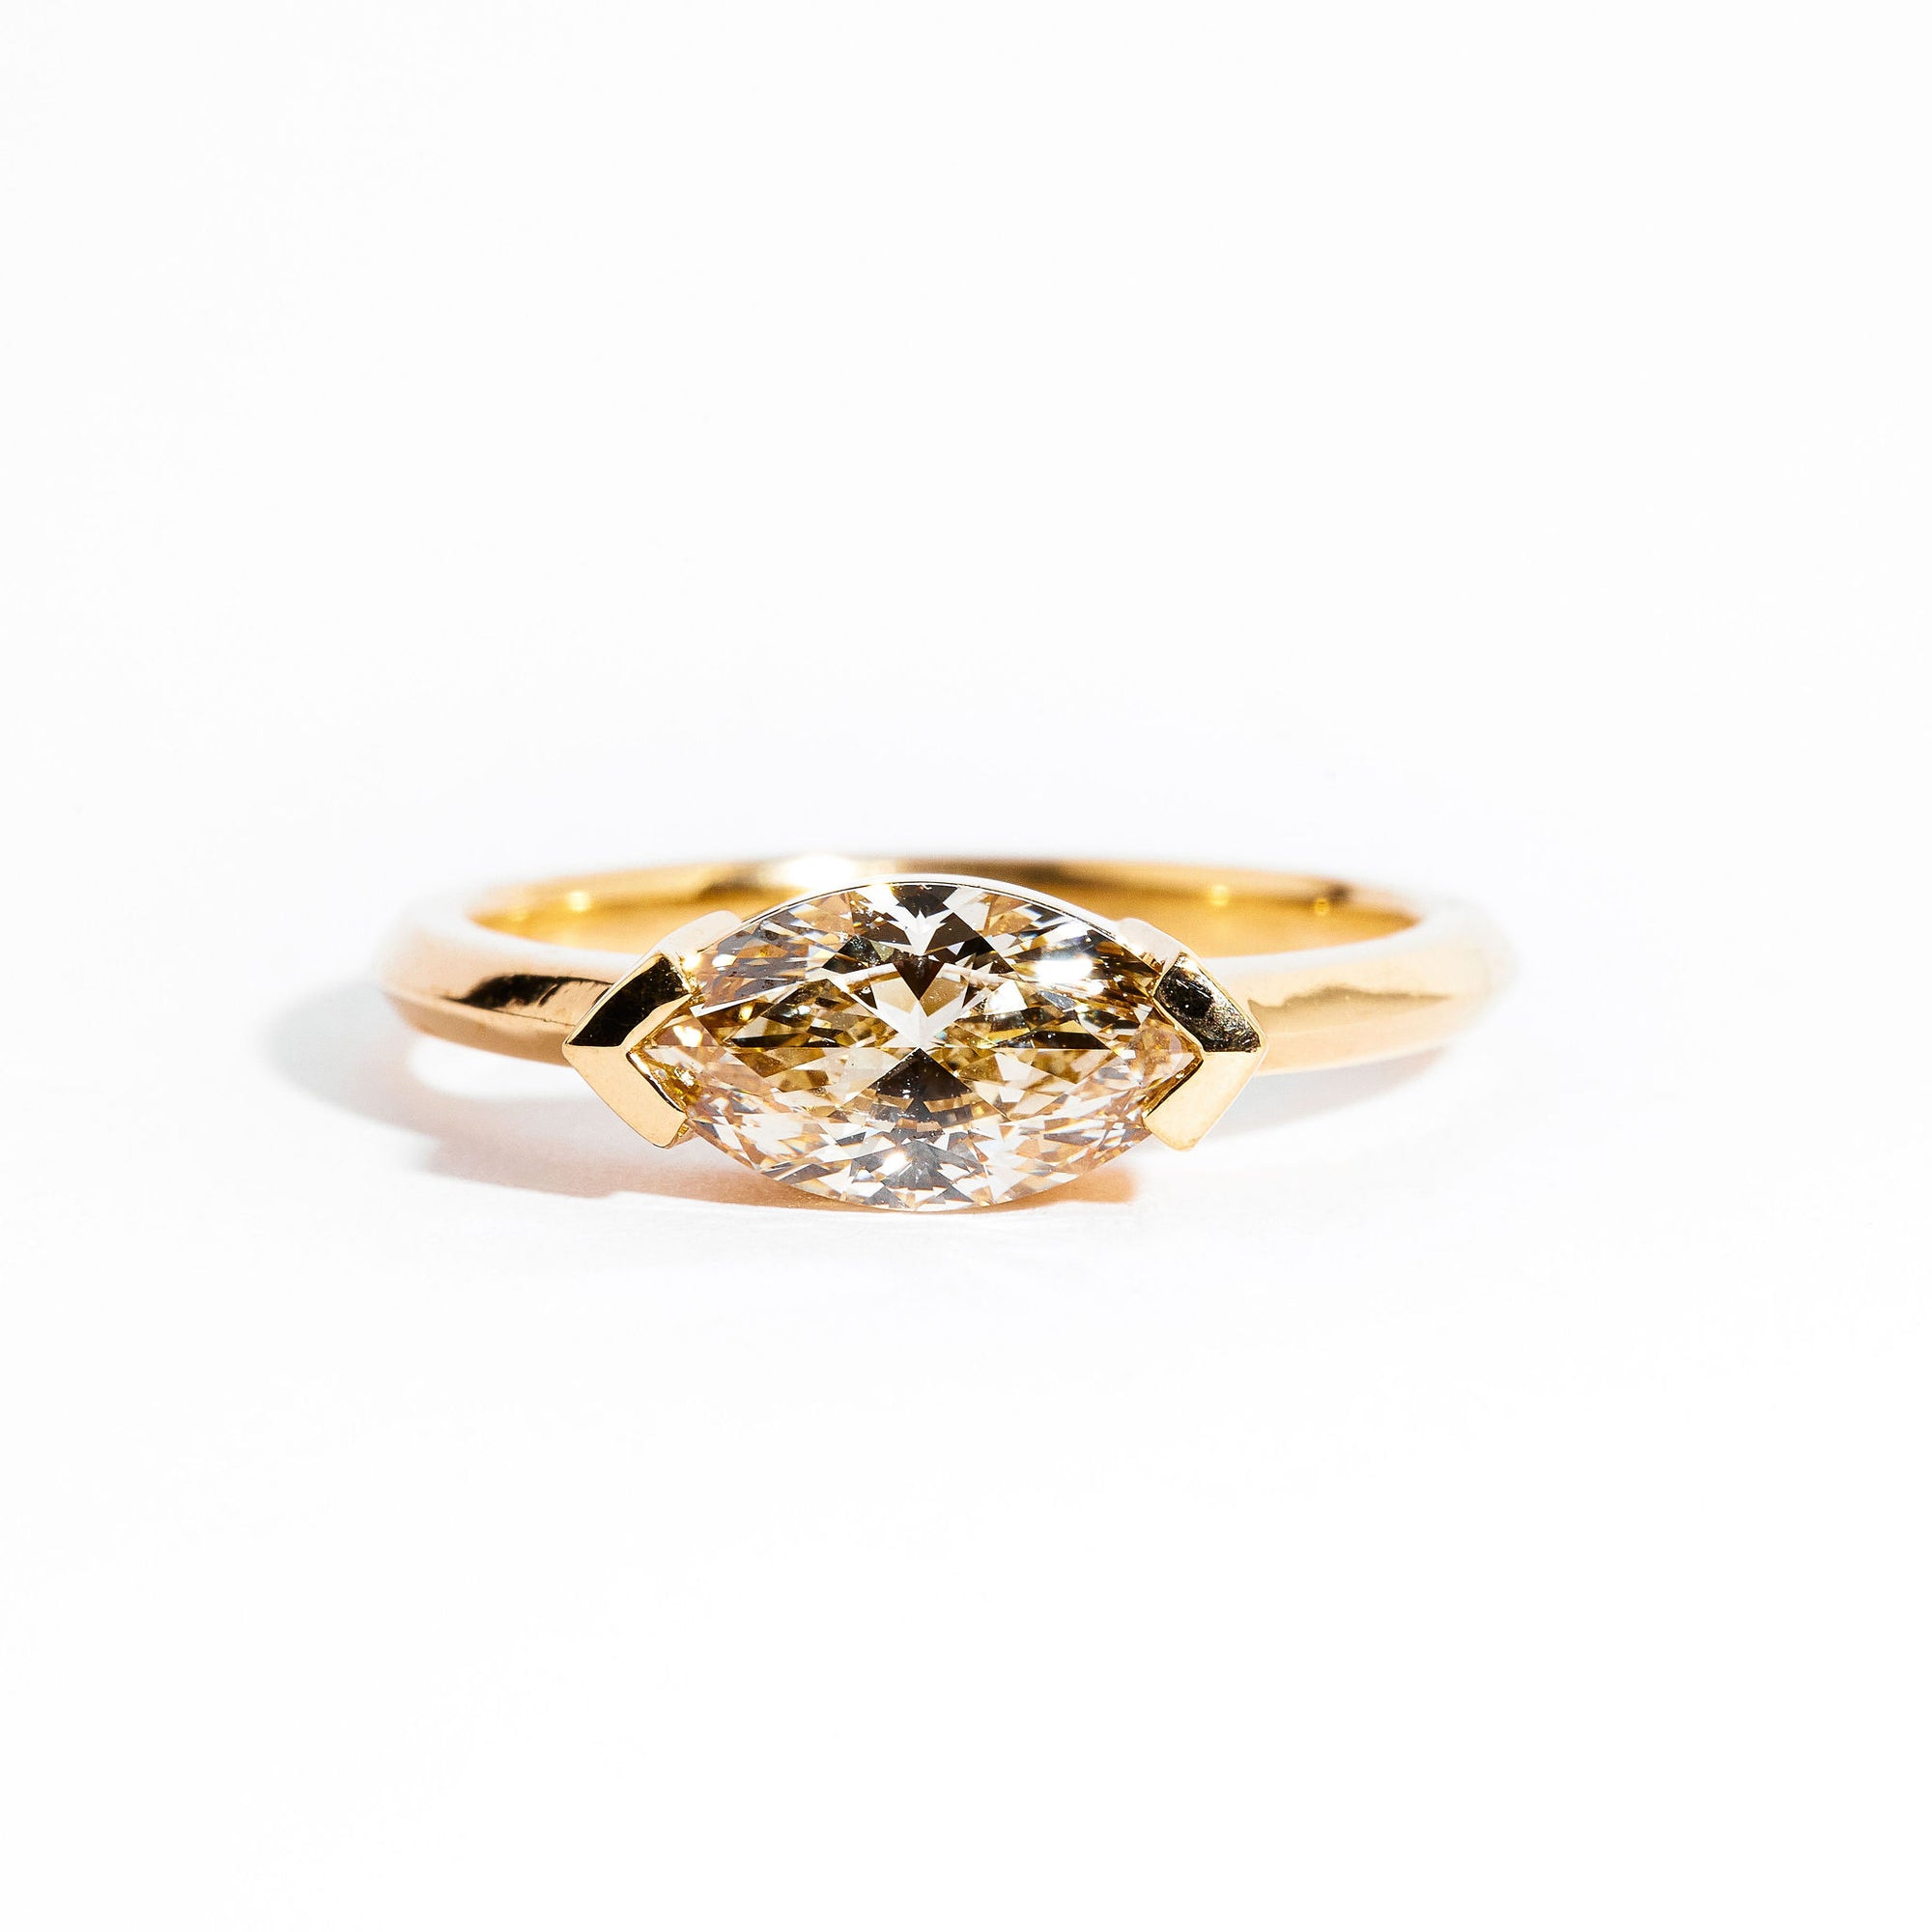 Hand crafted 18 carat yellow gold solitaire ring with  marquise champagne diamond. 